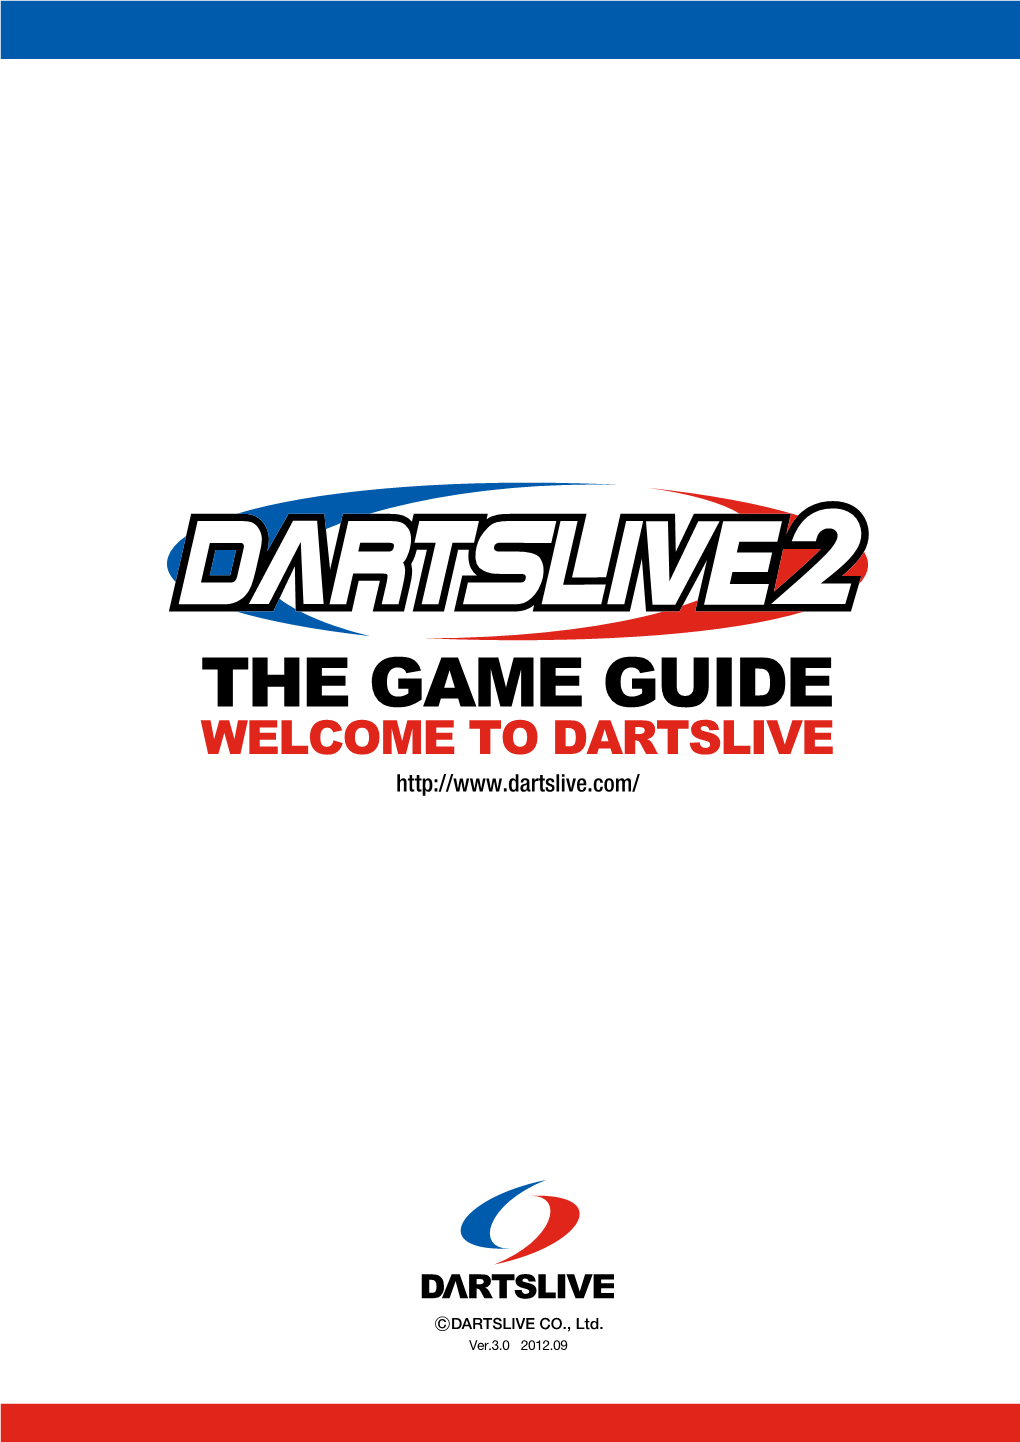 The Game Guide Welcome to Dartslive